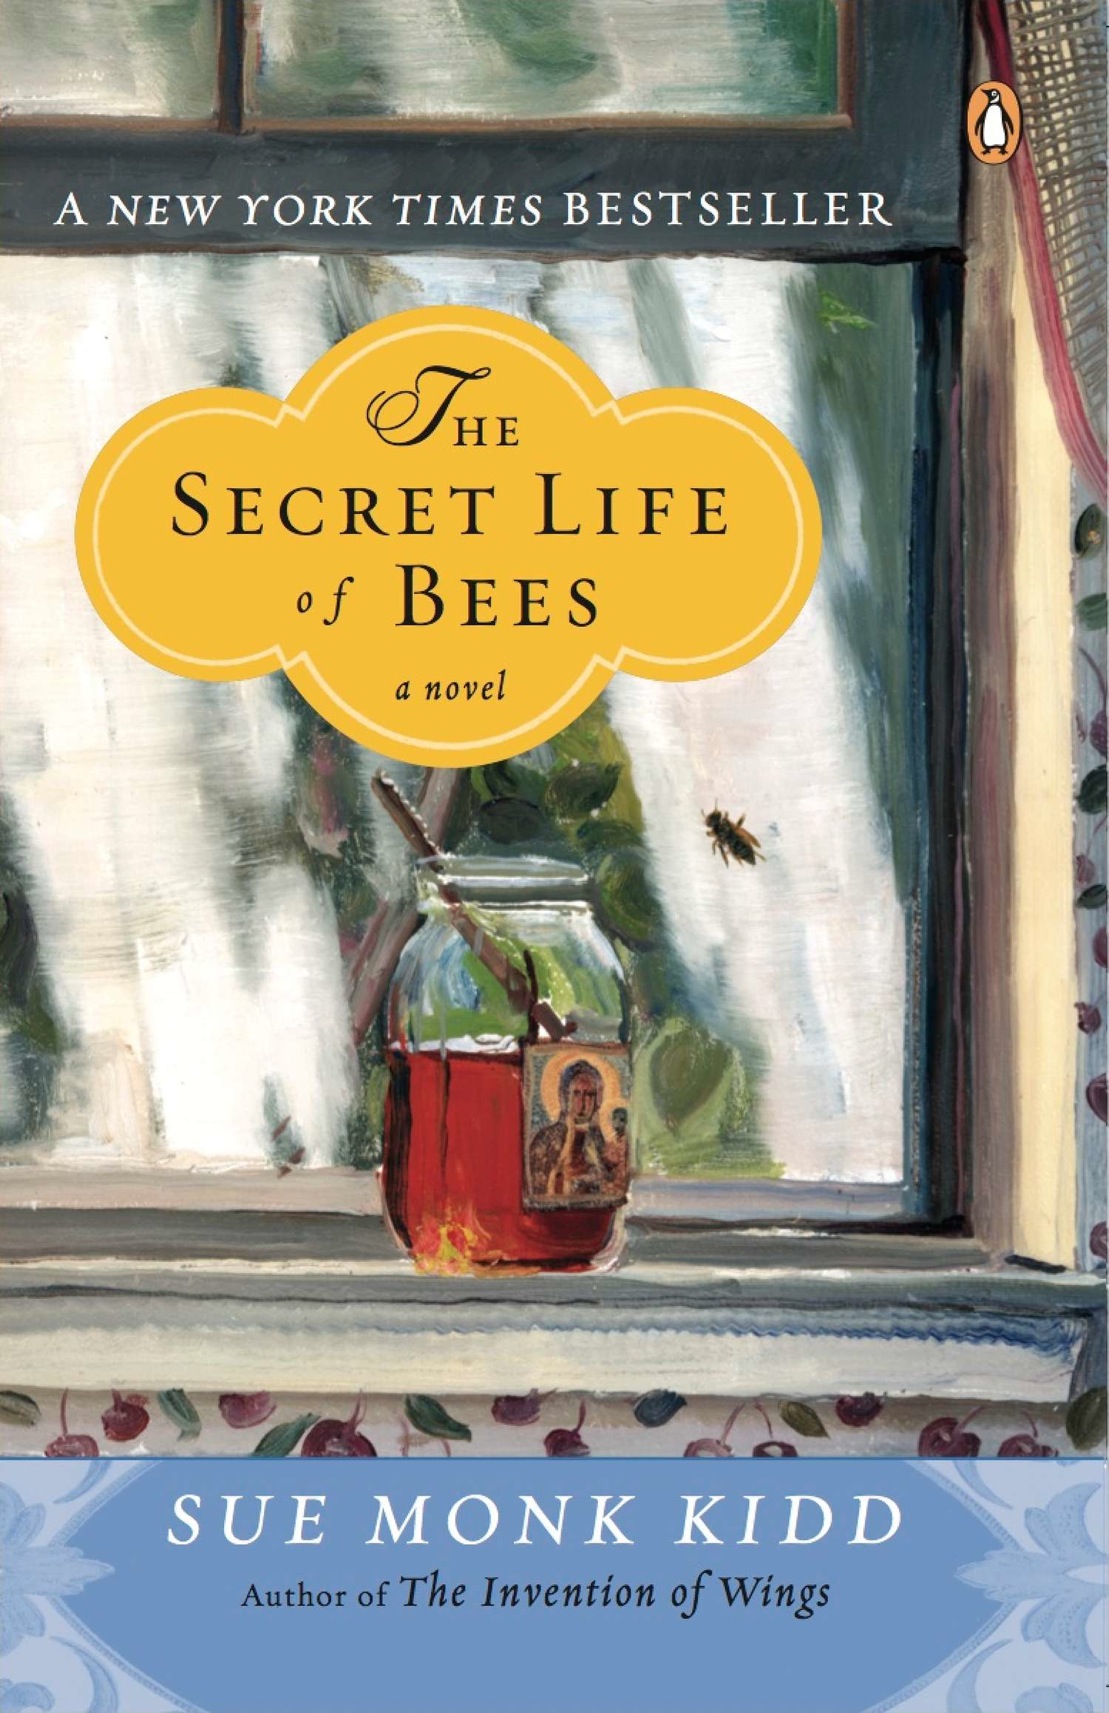 The Secret Life of Bees (2014) by Sue Monk Kidd